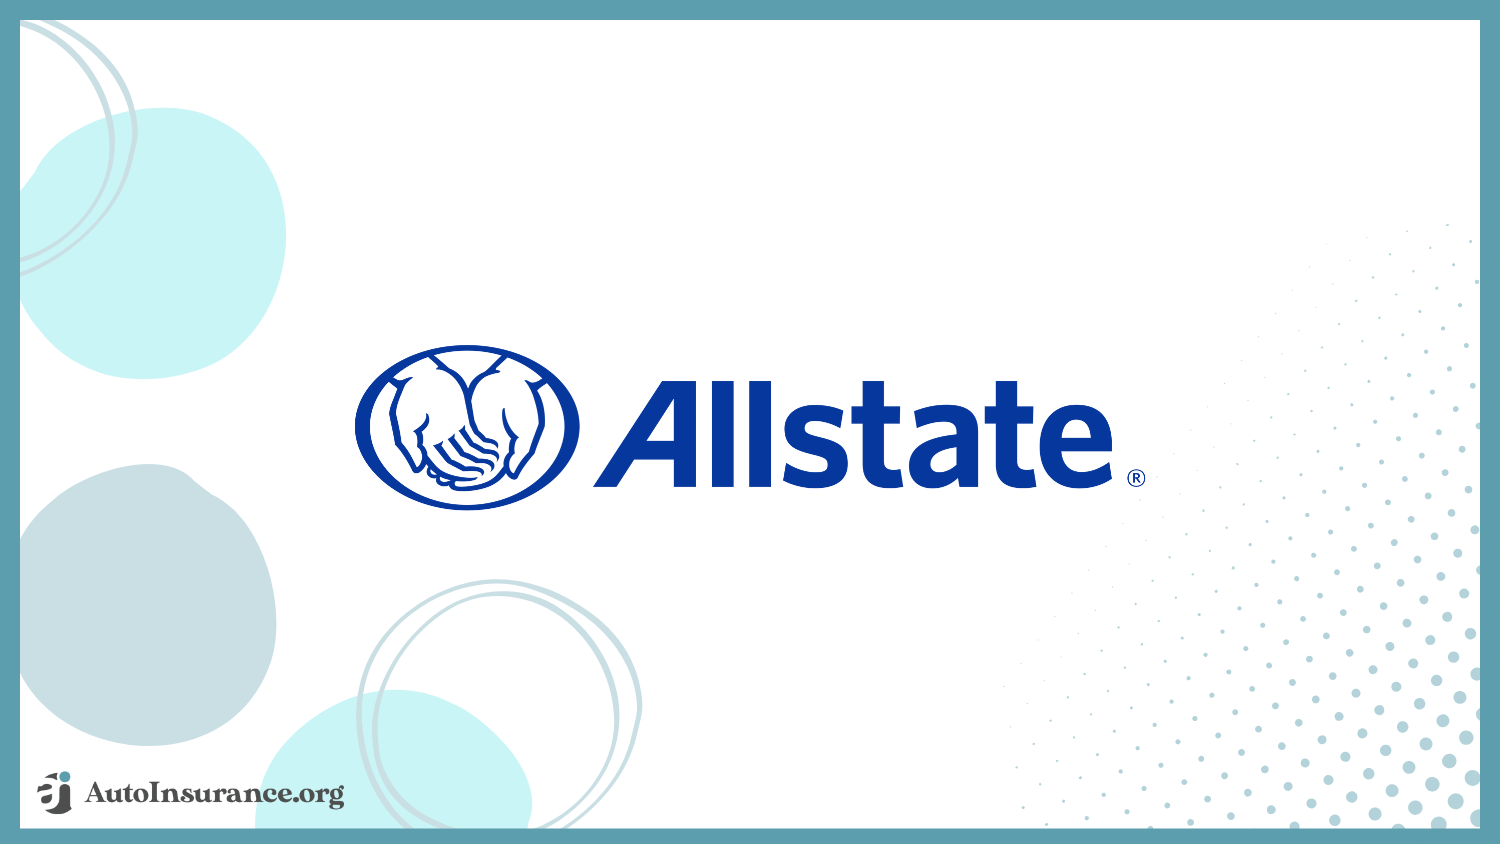 auto insurance companies with the best customer service: Allstate